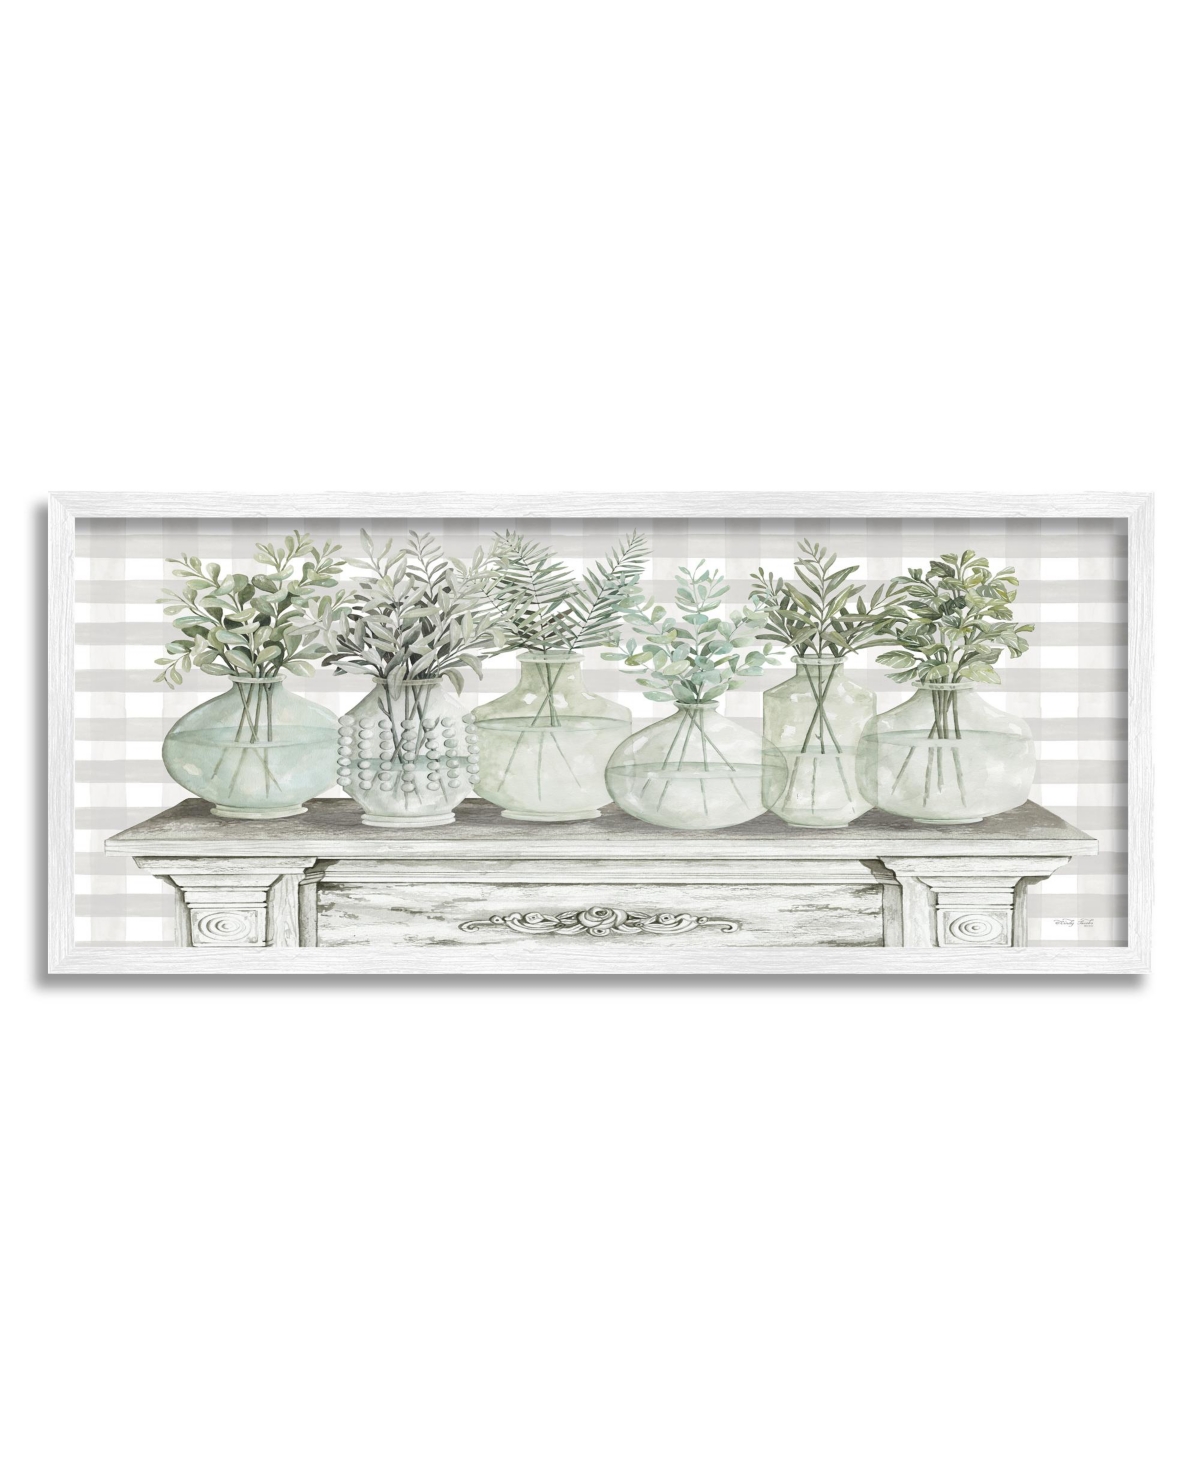 Stupell Industries Country Plant Herb Jars Framed Giclee Art, 10" X 1.5" X 24" In Multi-color